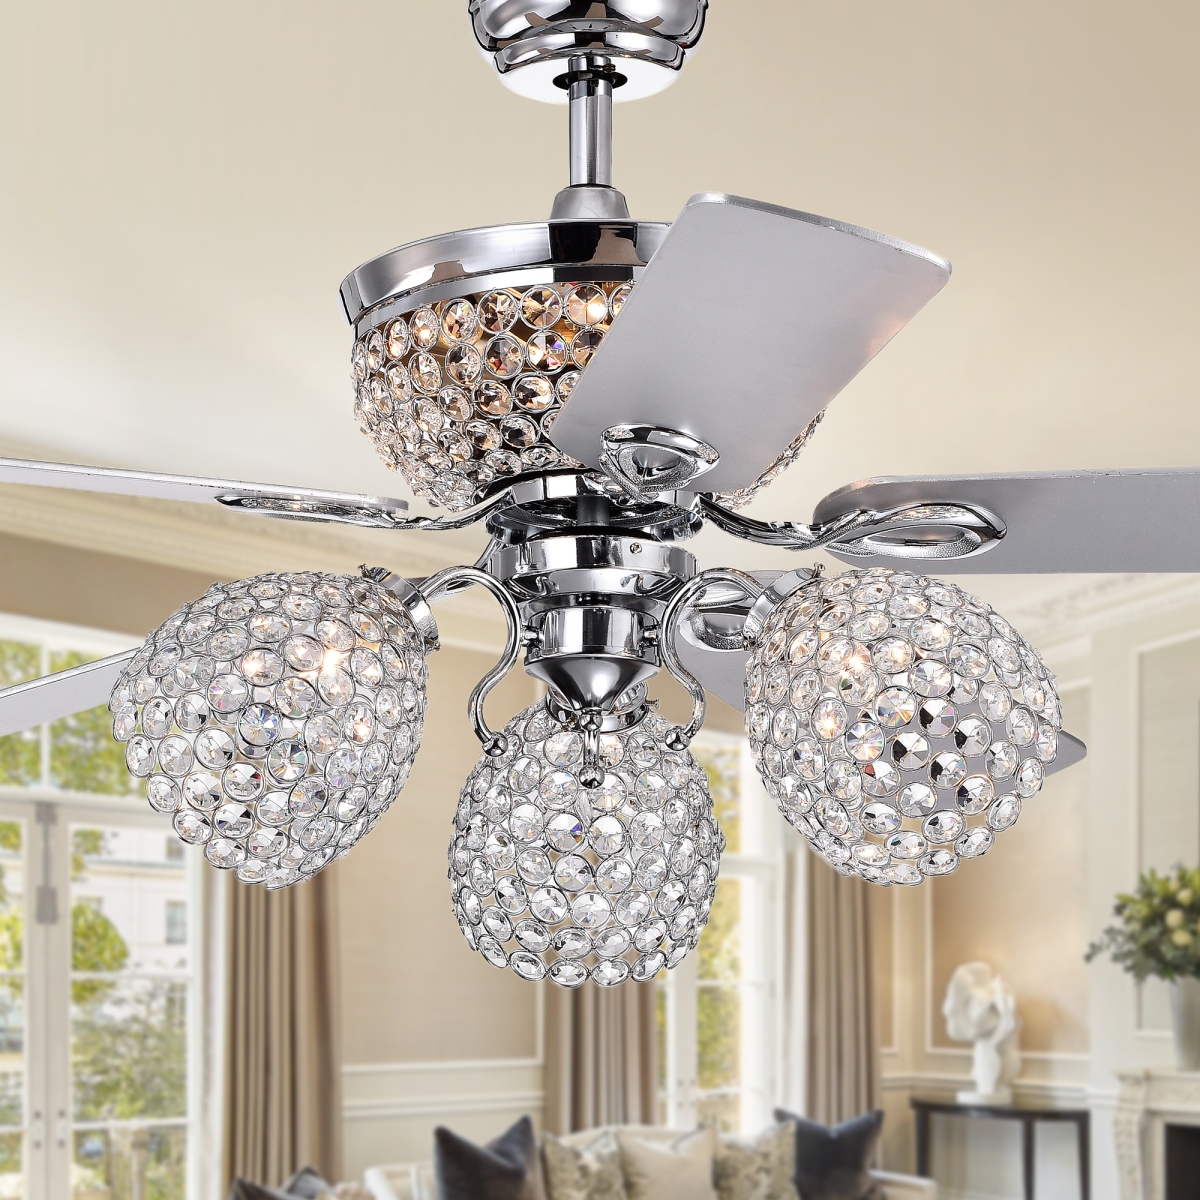 Cfl-8415remo-ch 52 In. Jasper 5-blade Lighted Ceiling Fan With Multiple Crystal Lamps, Silver